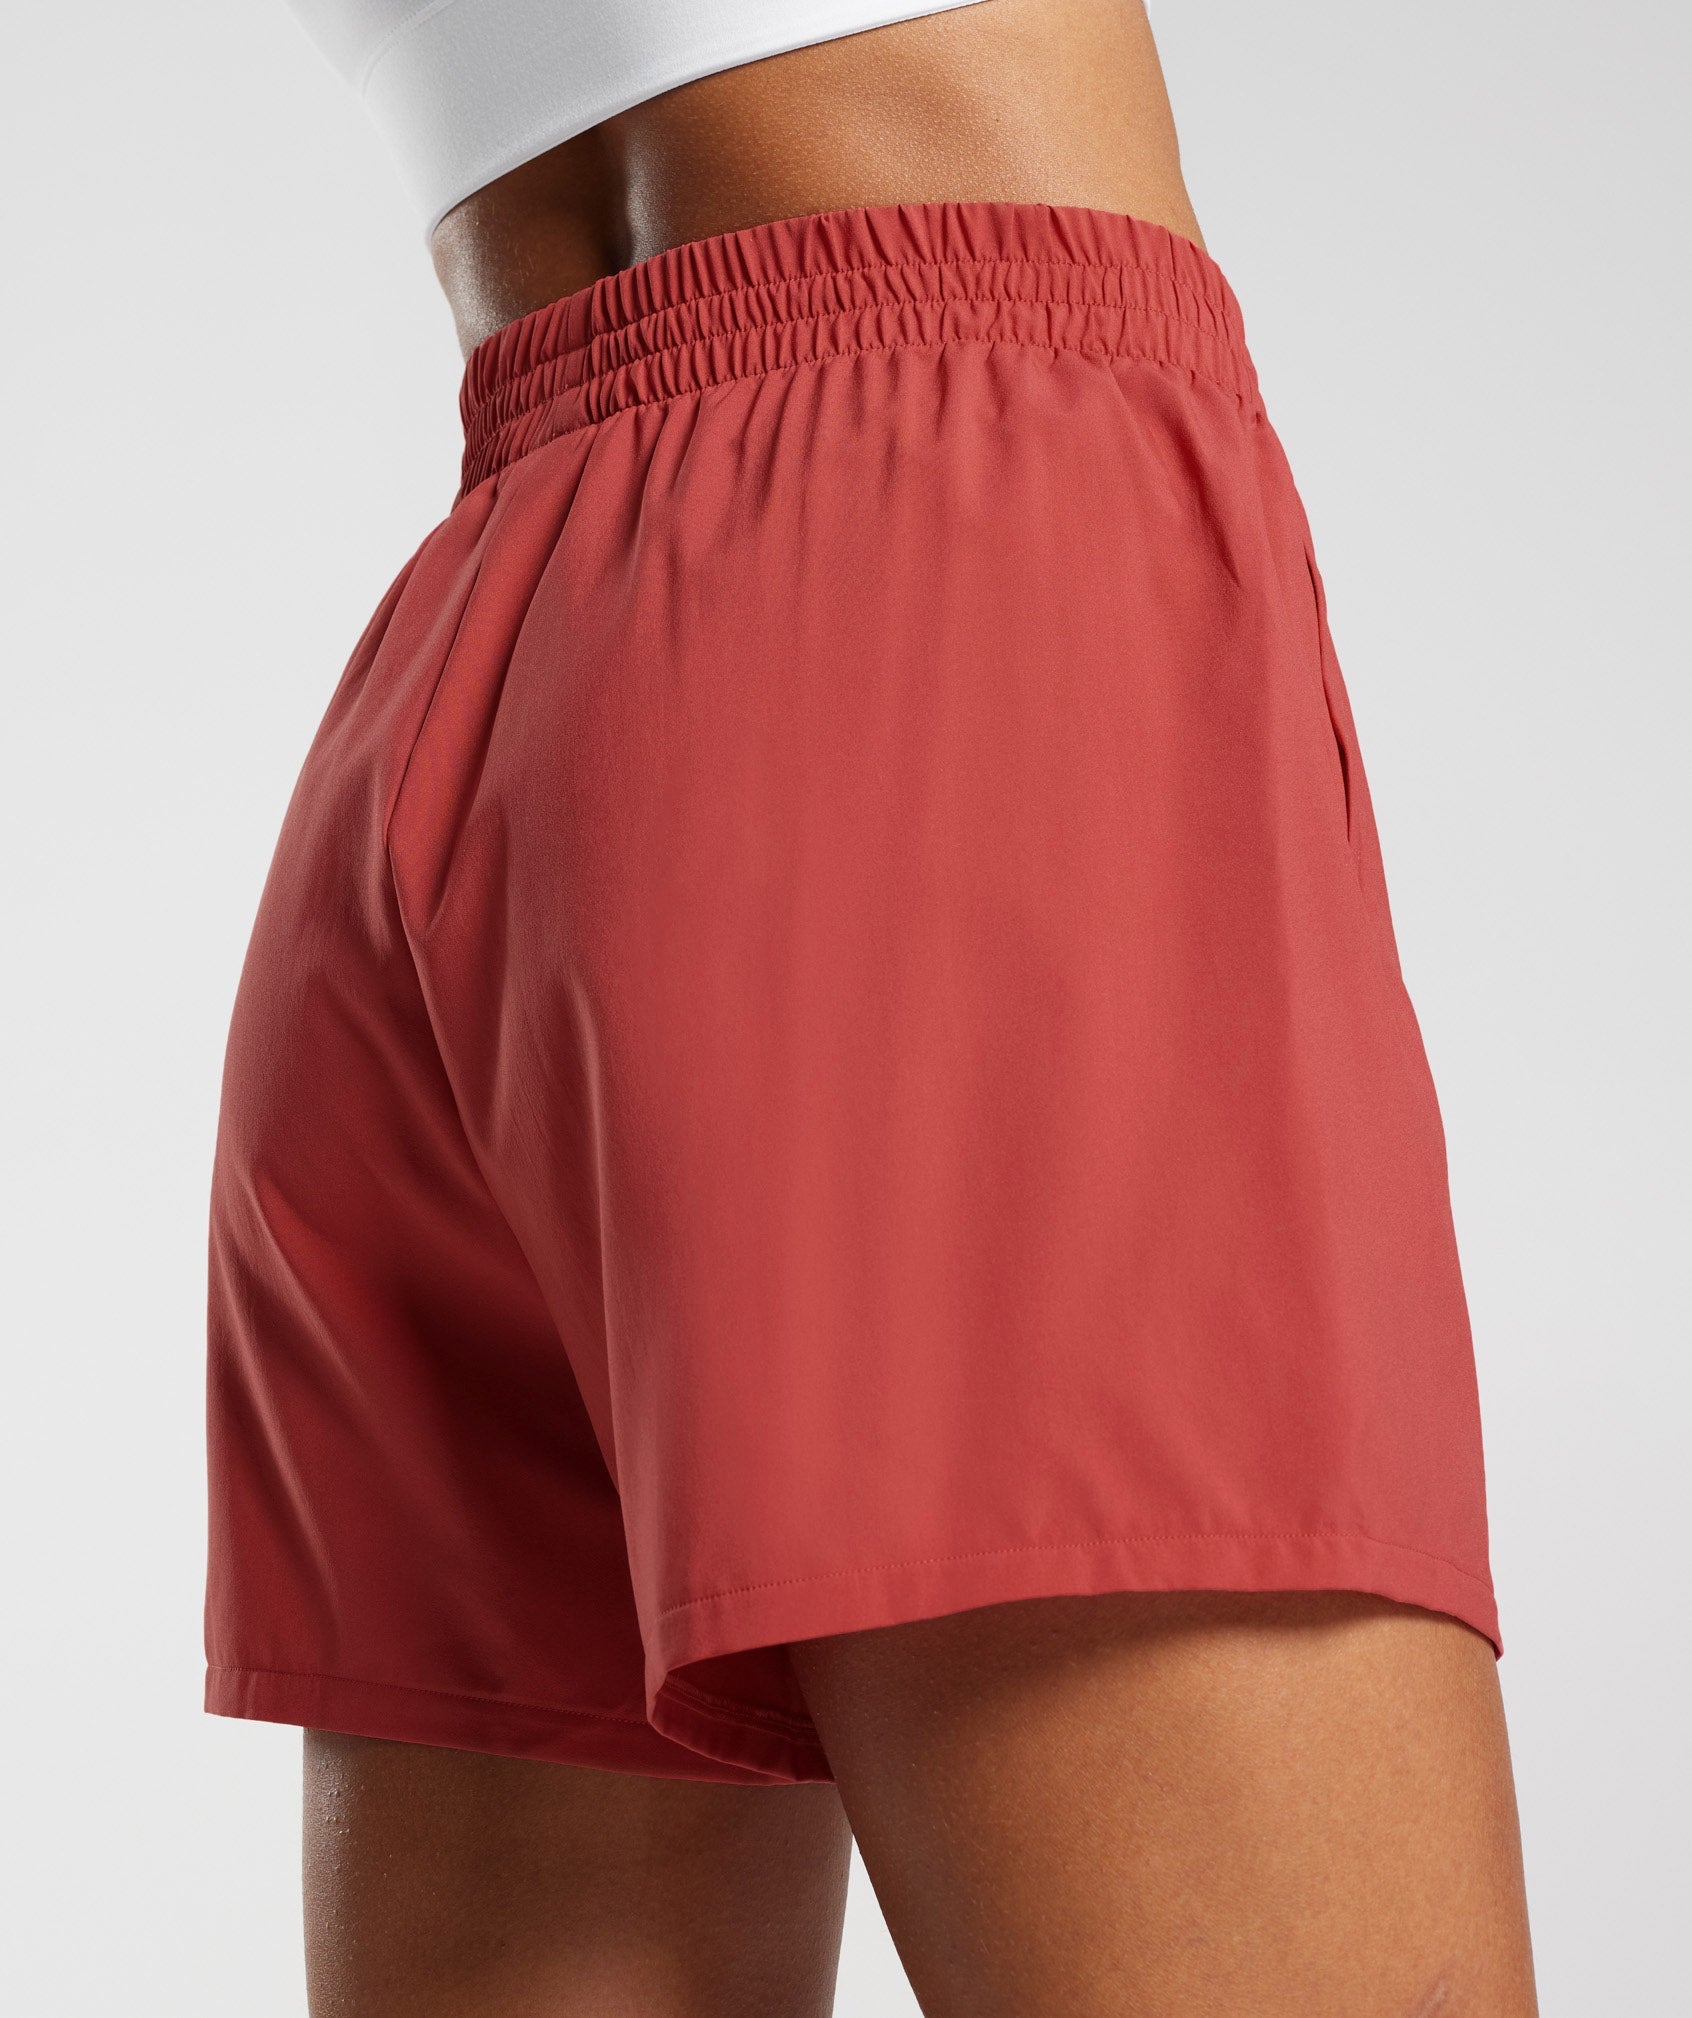 Girls Red Recycled Fibre Shorts with Internal Brief